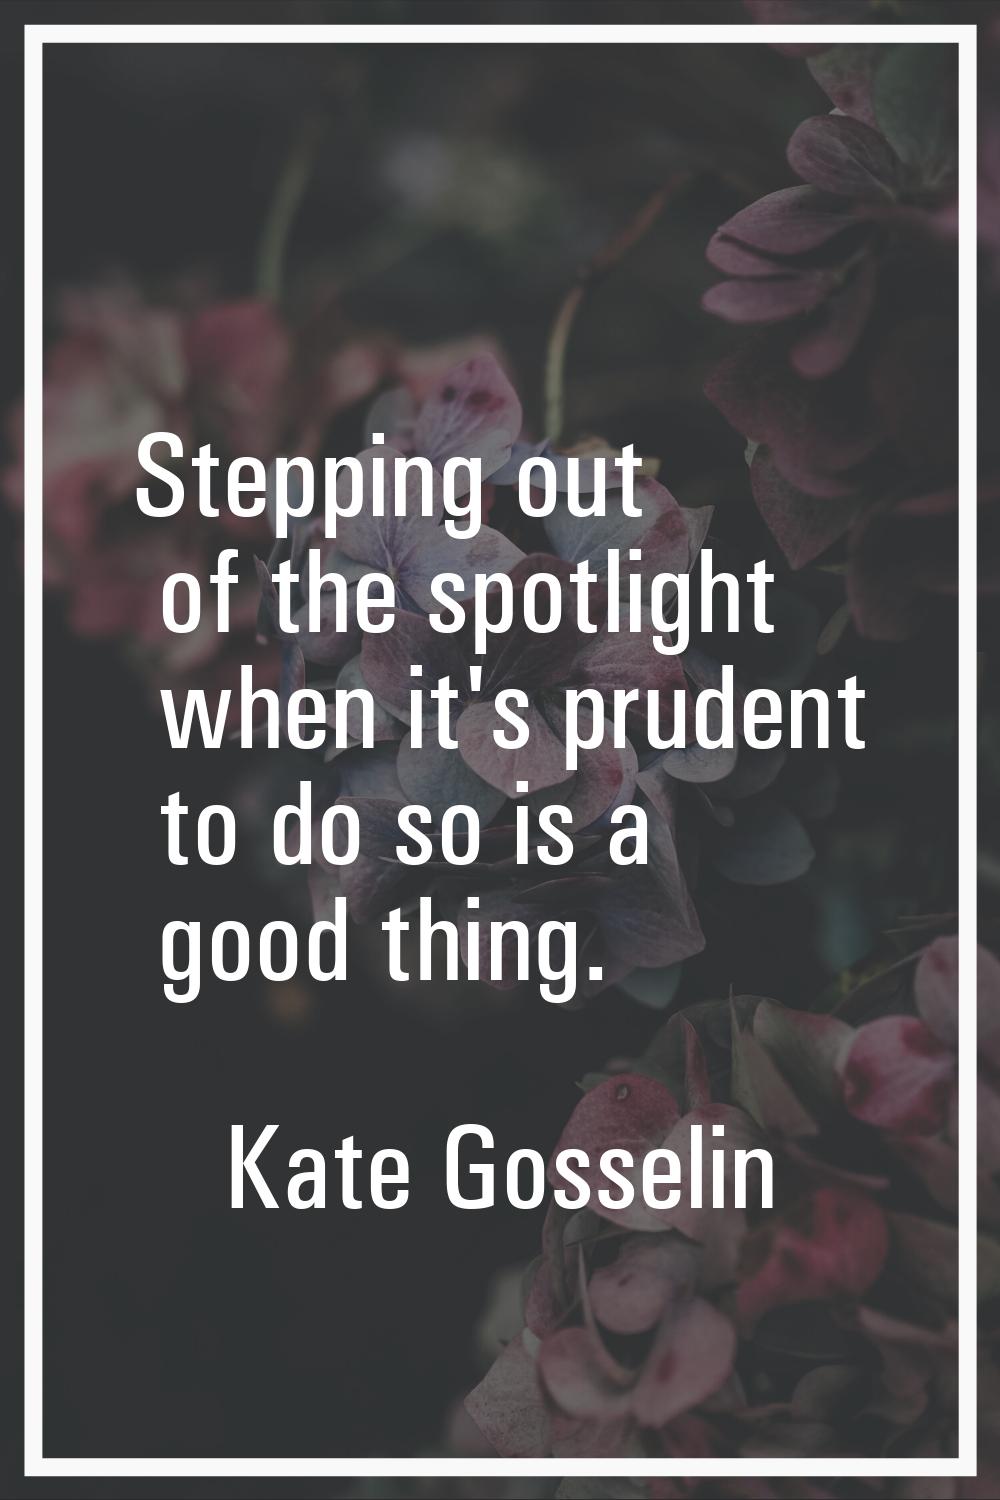 Stepping out of the spotlight when it's prudent to do so is a good thing.